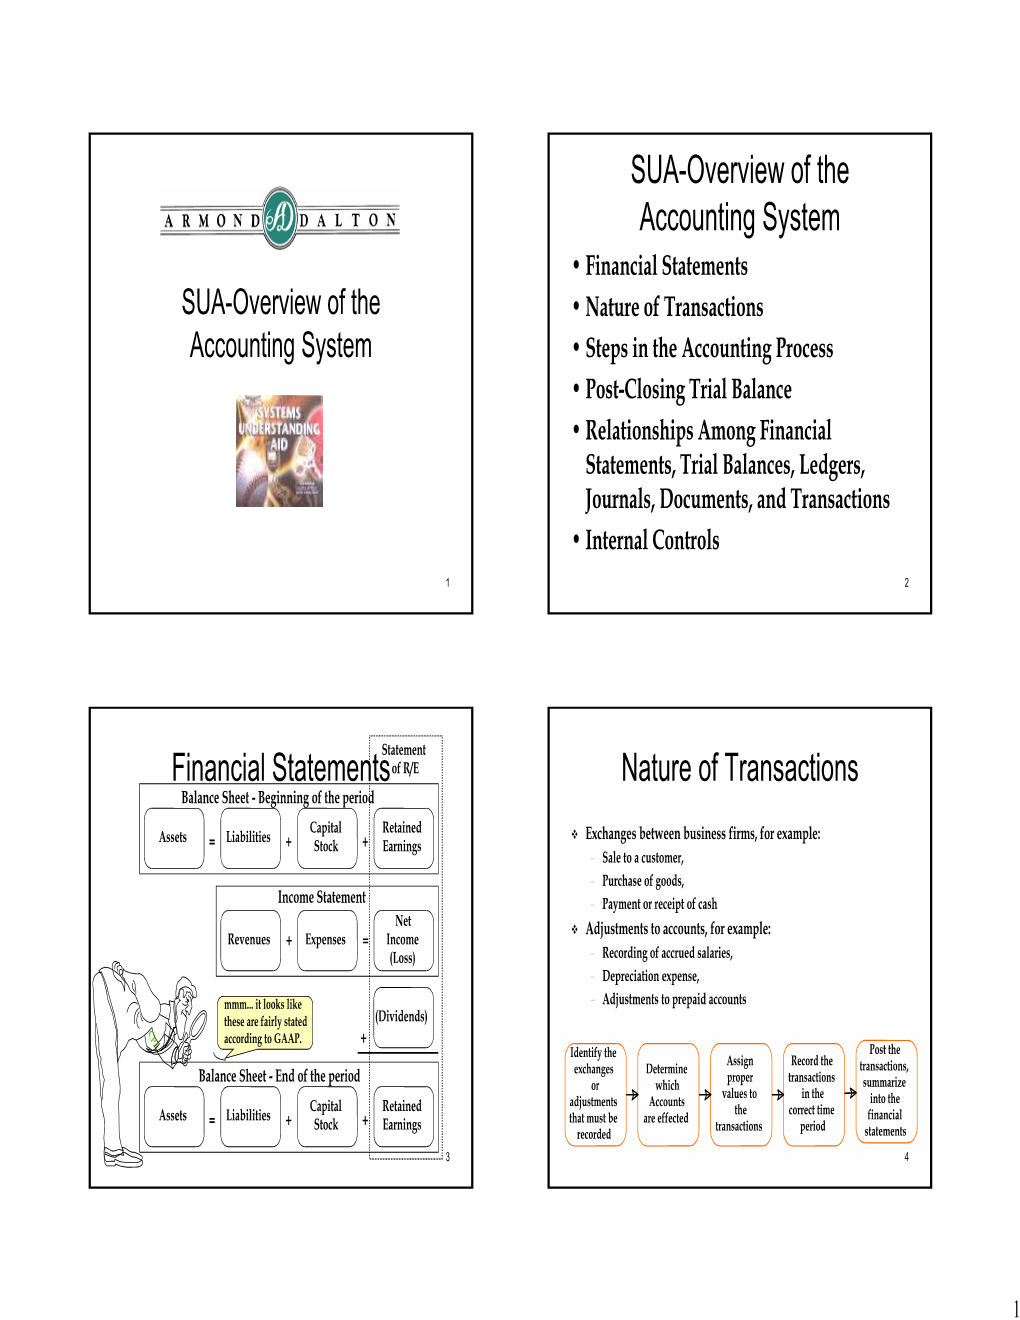 SUA-Overview of the Accounting System Financial Statements Nature of Transactions